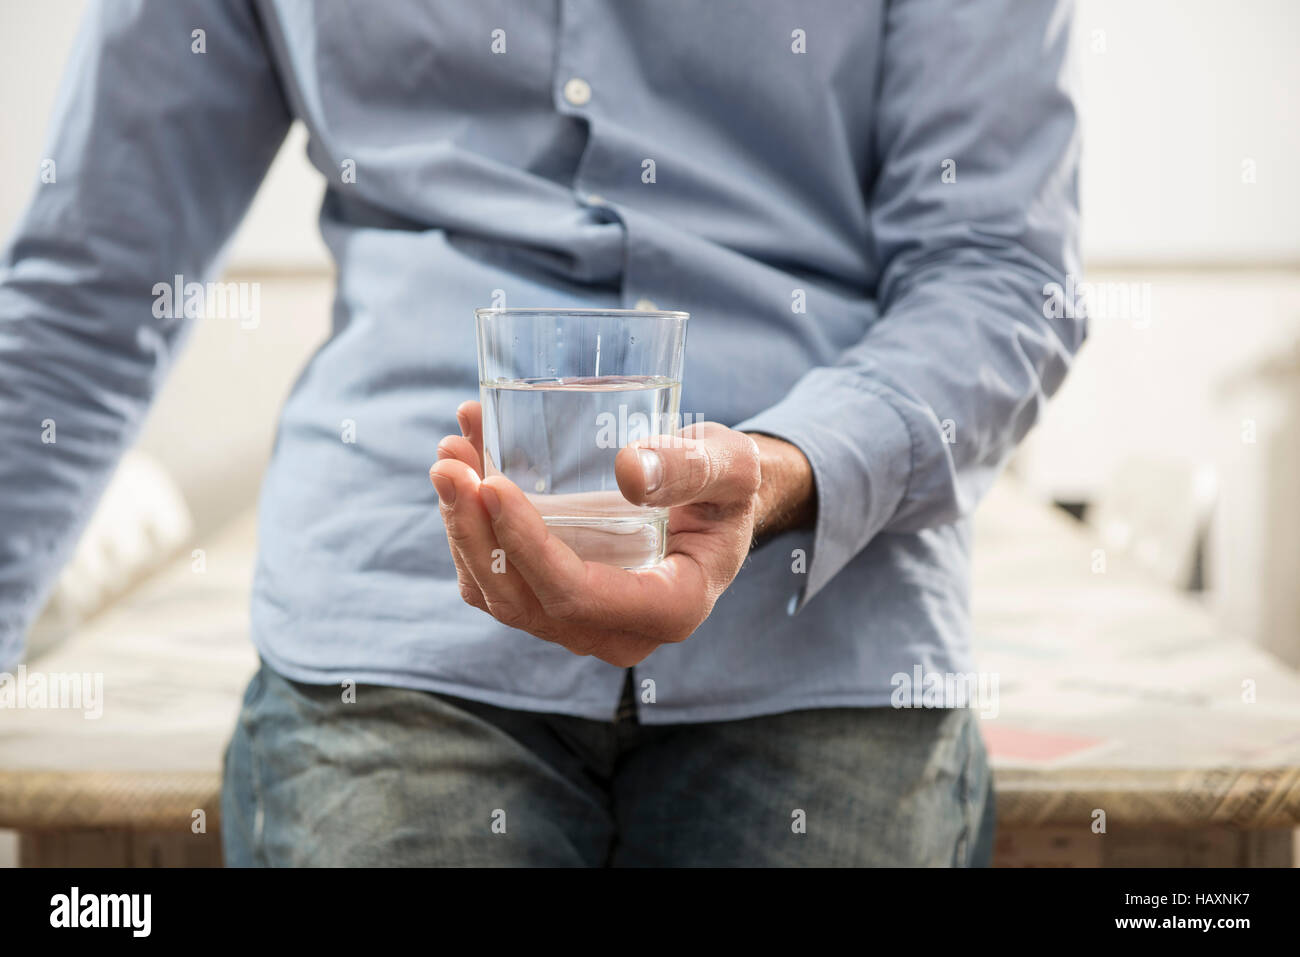 man who holds in hand a glass of water Stock Photo